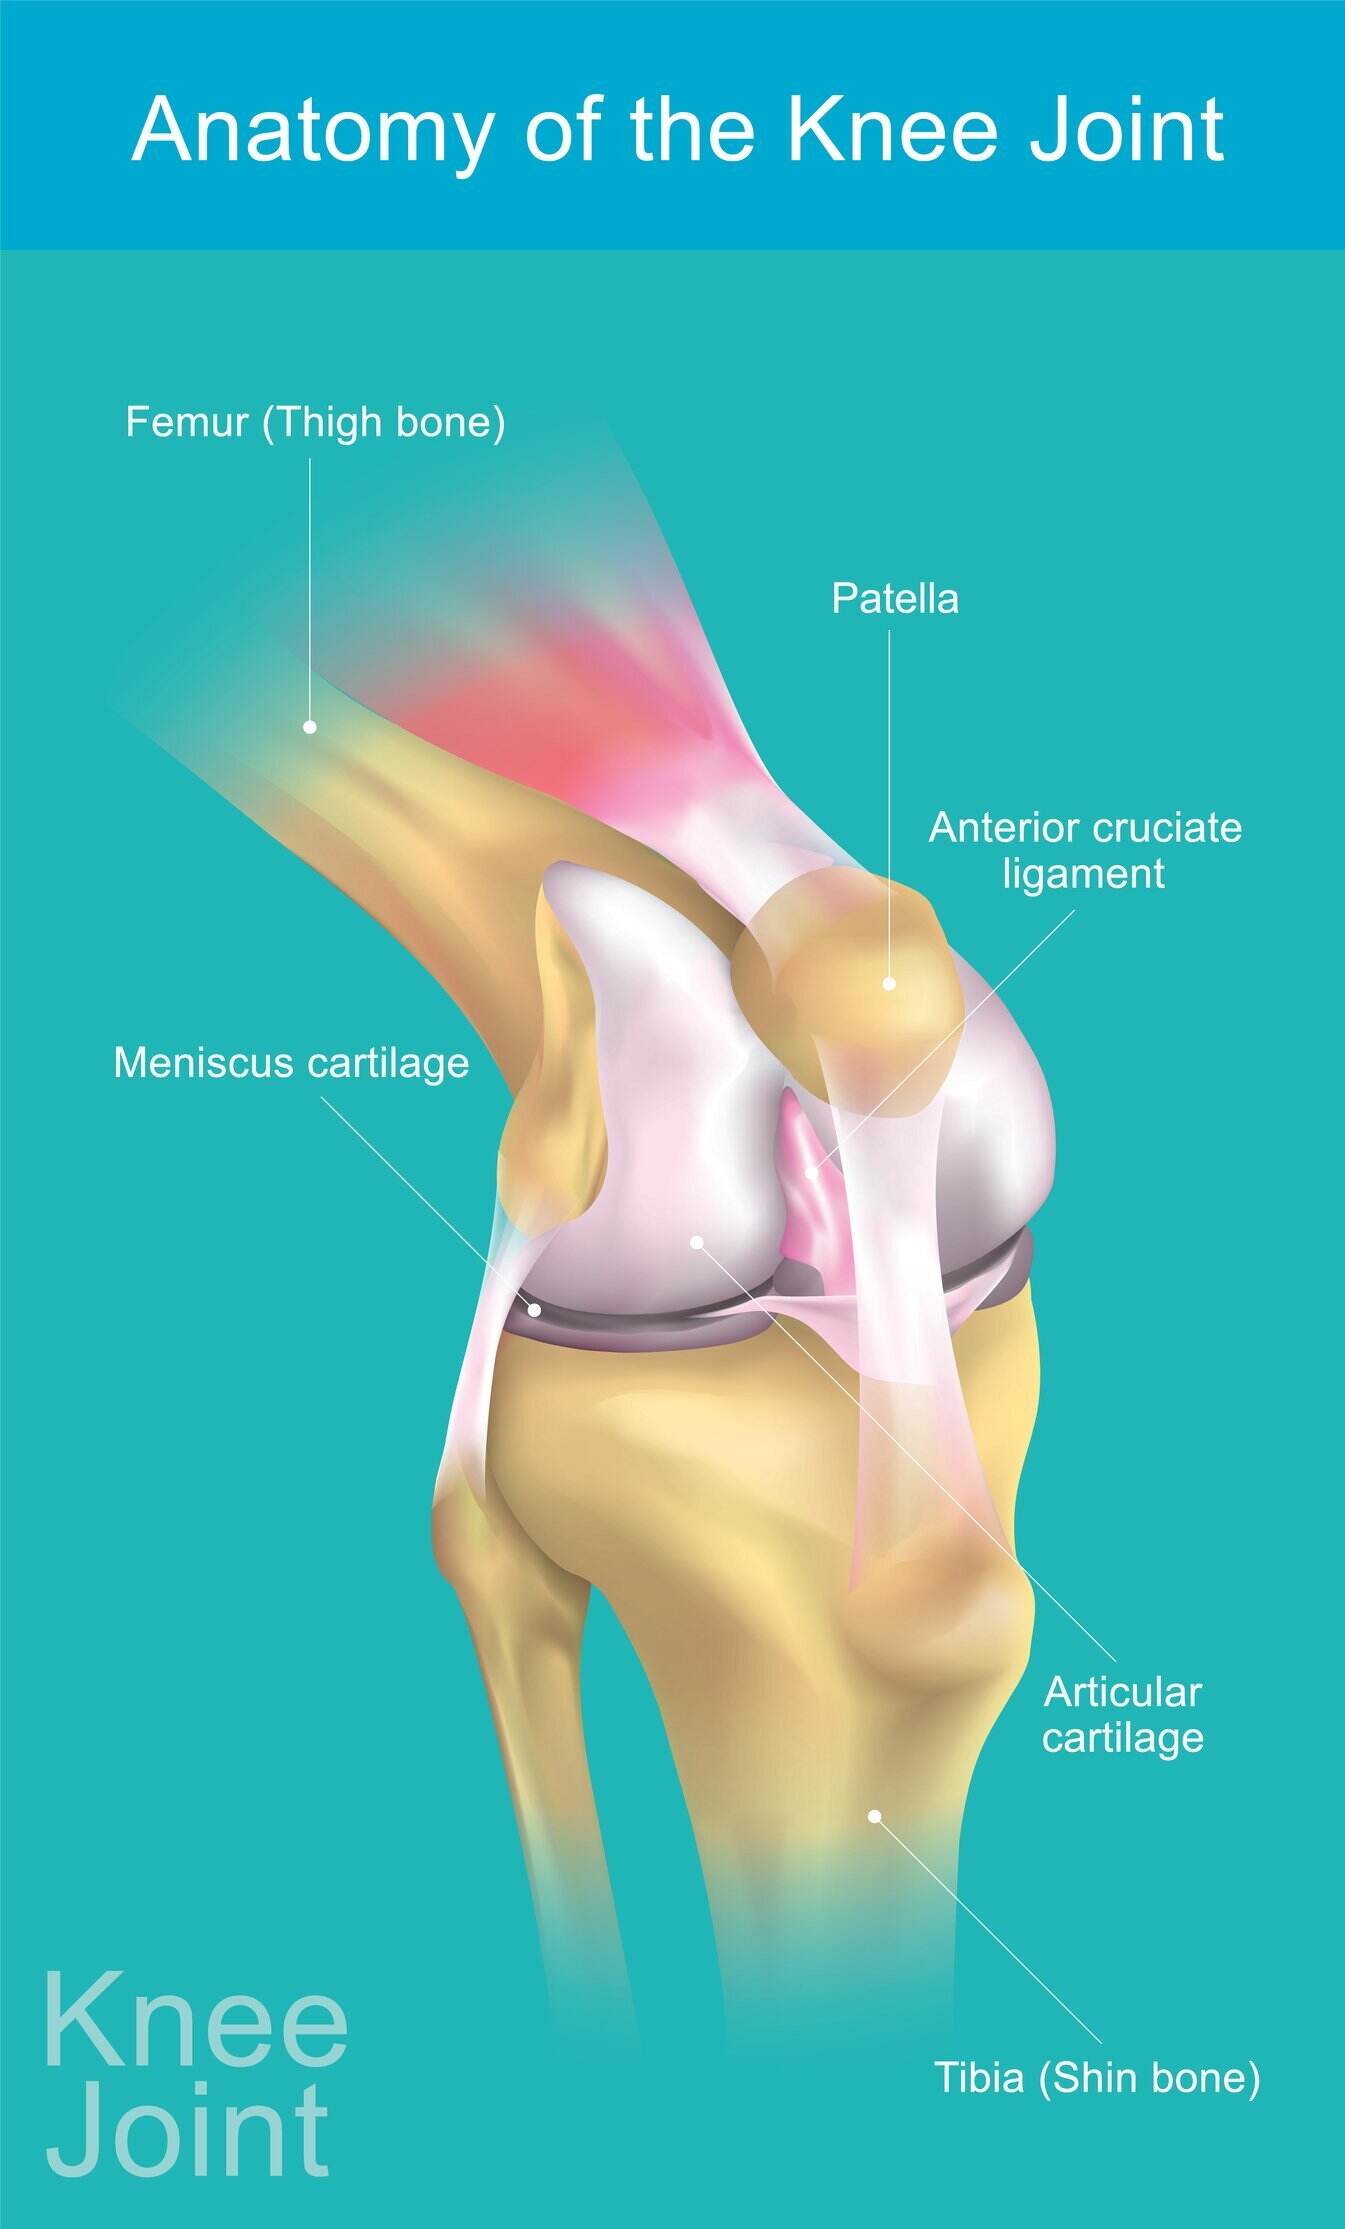 is a lateral or medial meniscus tear worse)